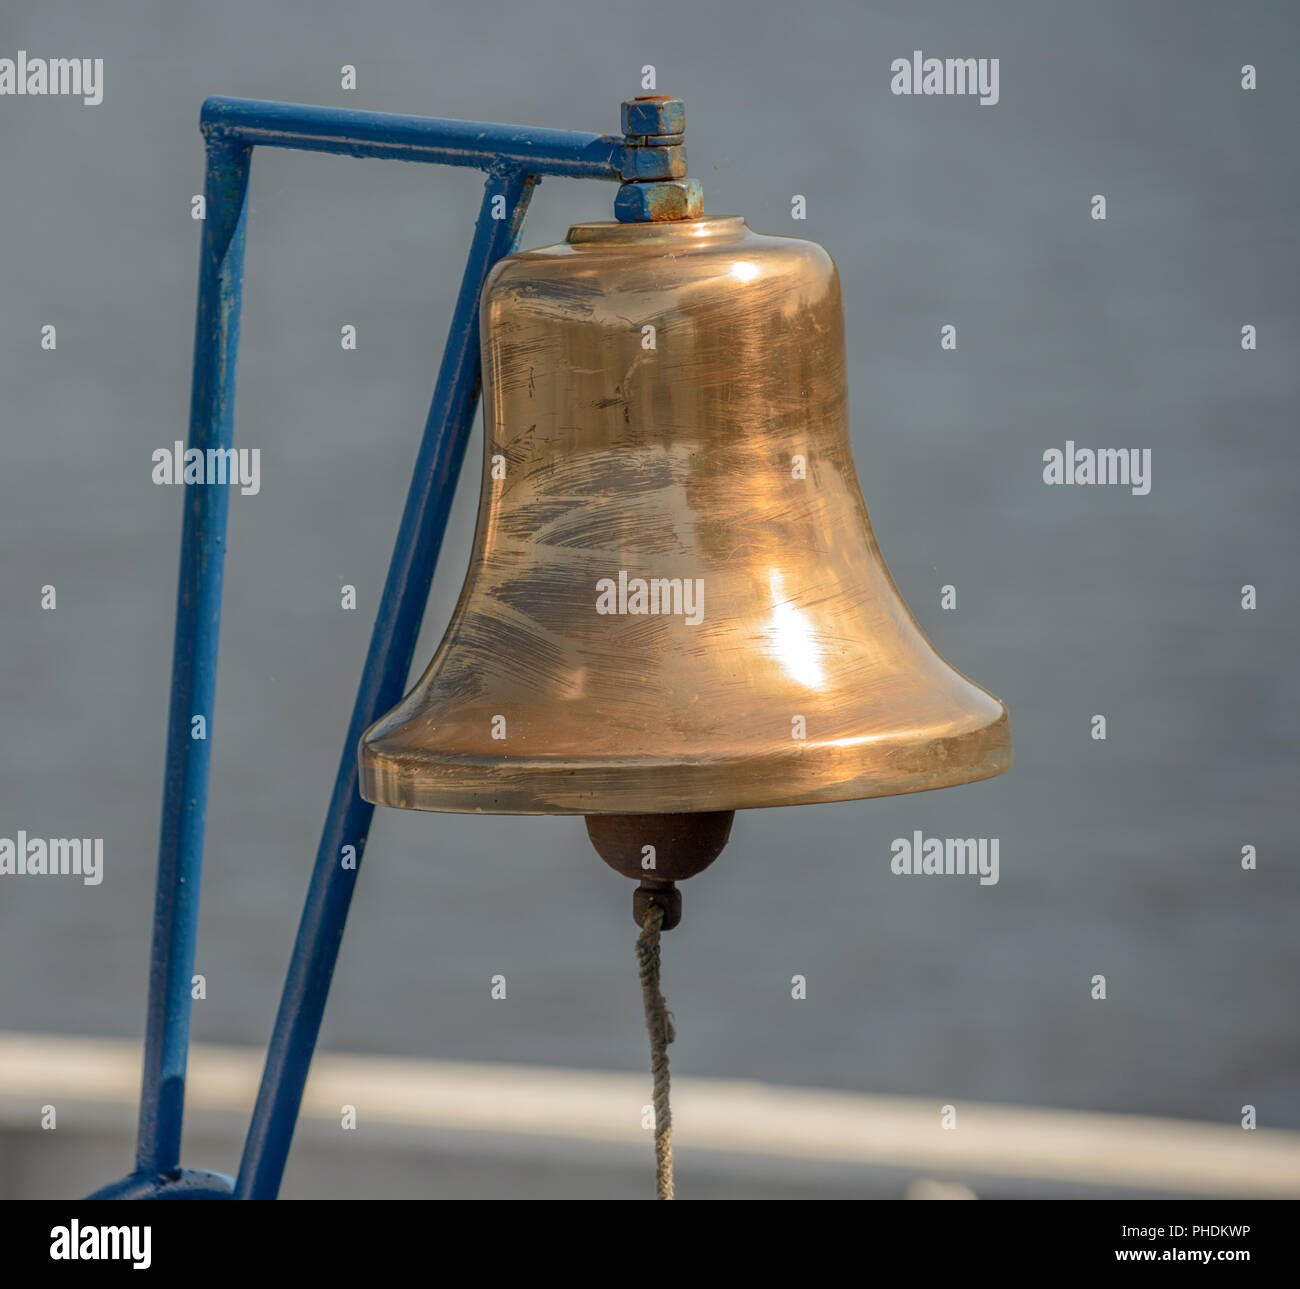 Ship's bell Stock Photo